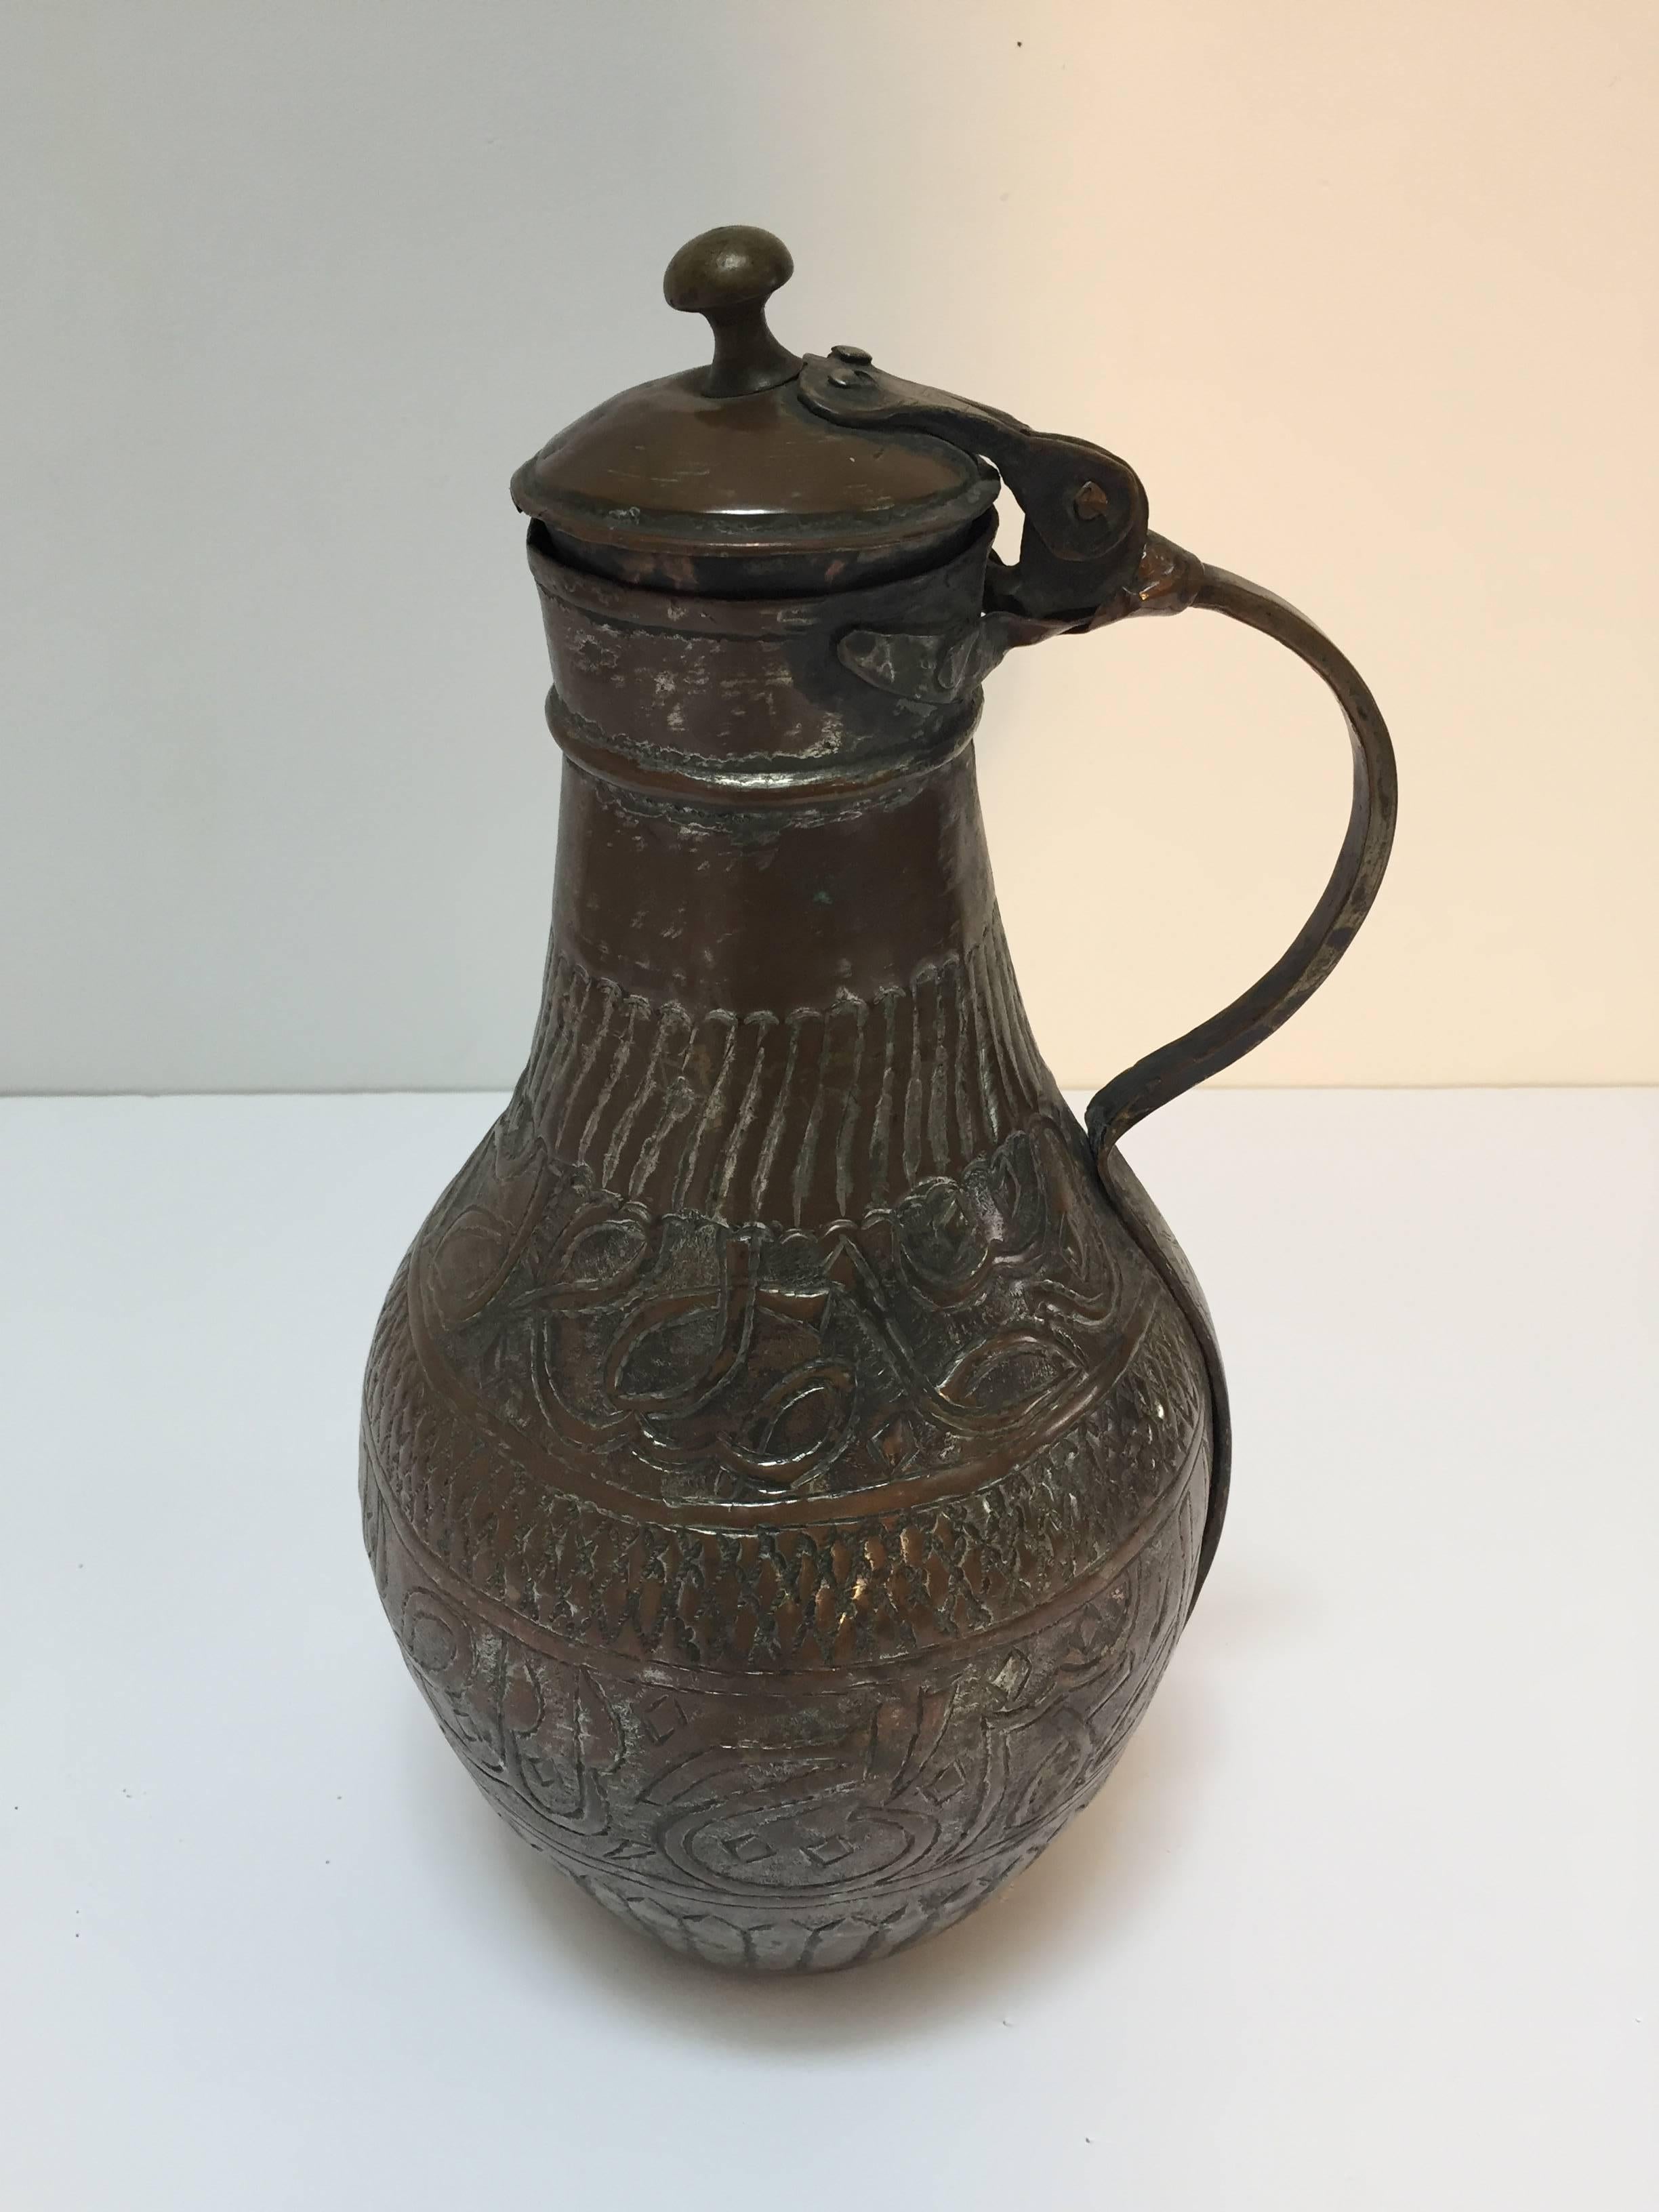 19th century Middle Eastern Arabian tinned copper ewer with lid.
Hand-hammered and chased copper with geometric design and Arabic calligraphy writing riveted finish on handle and lid.
Middle Eastern copper Persian style ewer probably from